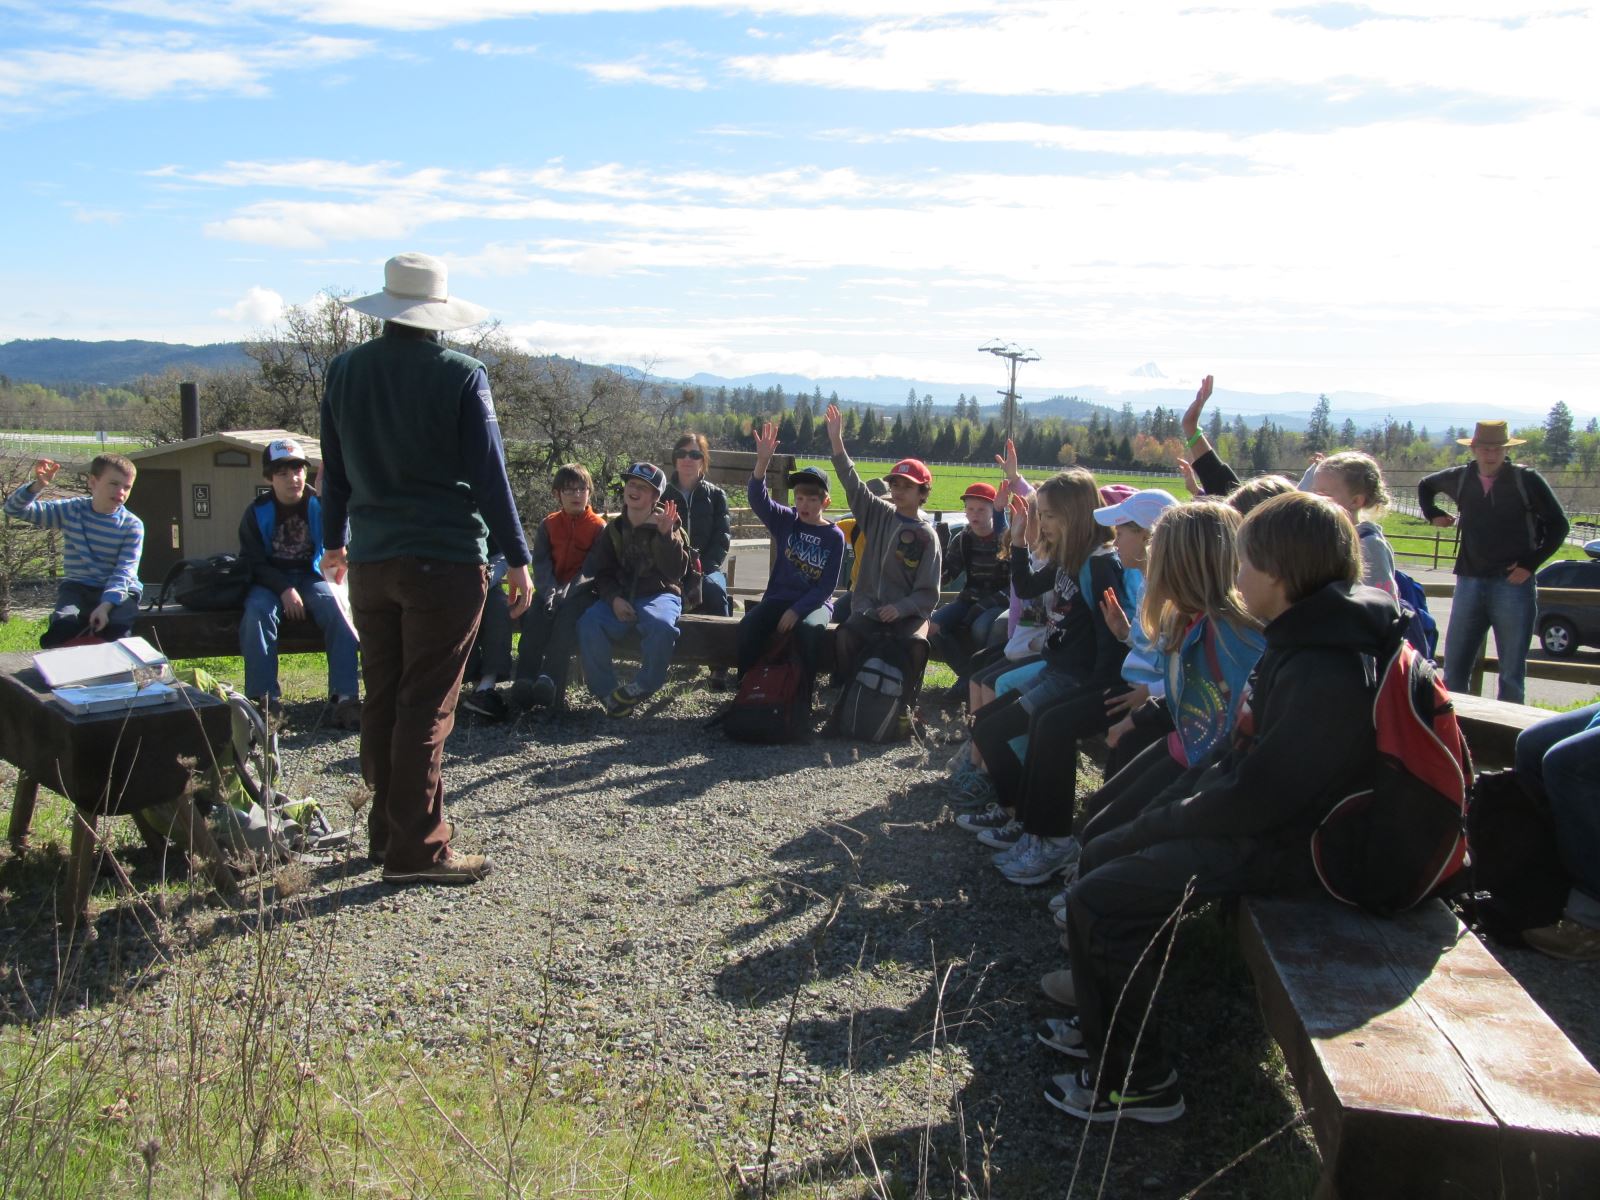  group of students sitting on benches outdoors attentively listen to an instructor wearing a hat. They are raising their hands, ready to answer or ask questions. The background shows a clear sky and a distant mountain range.